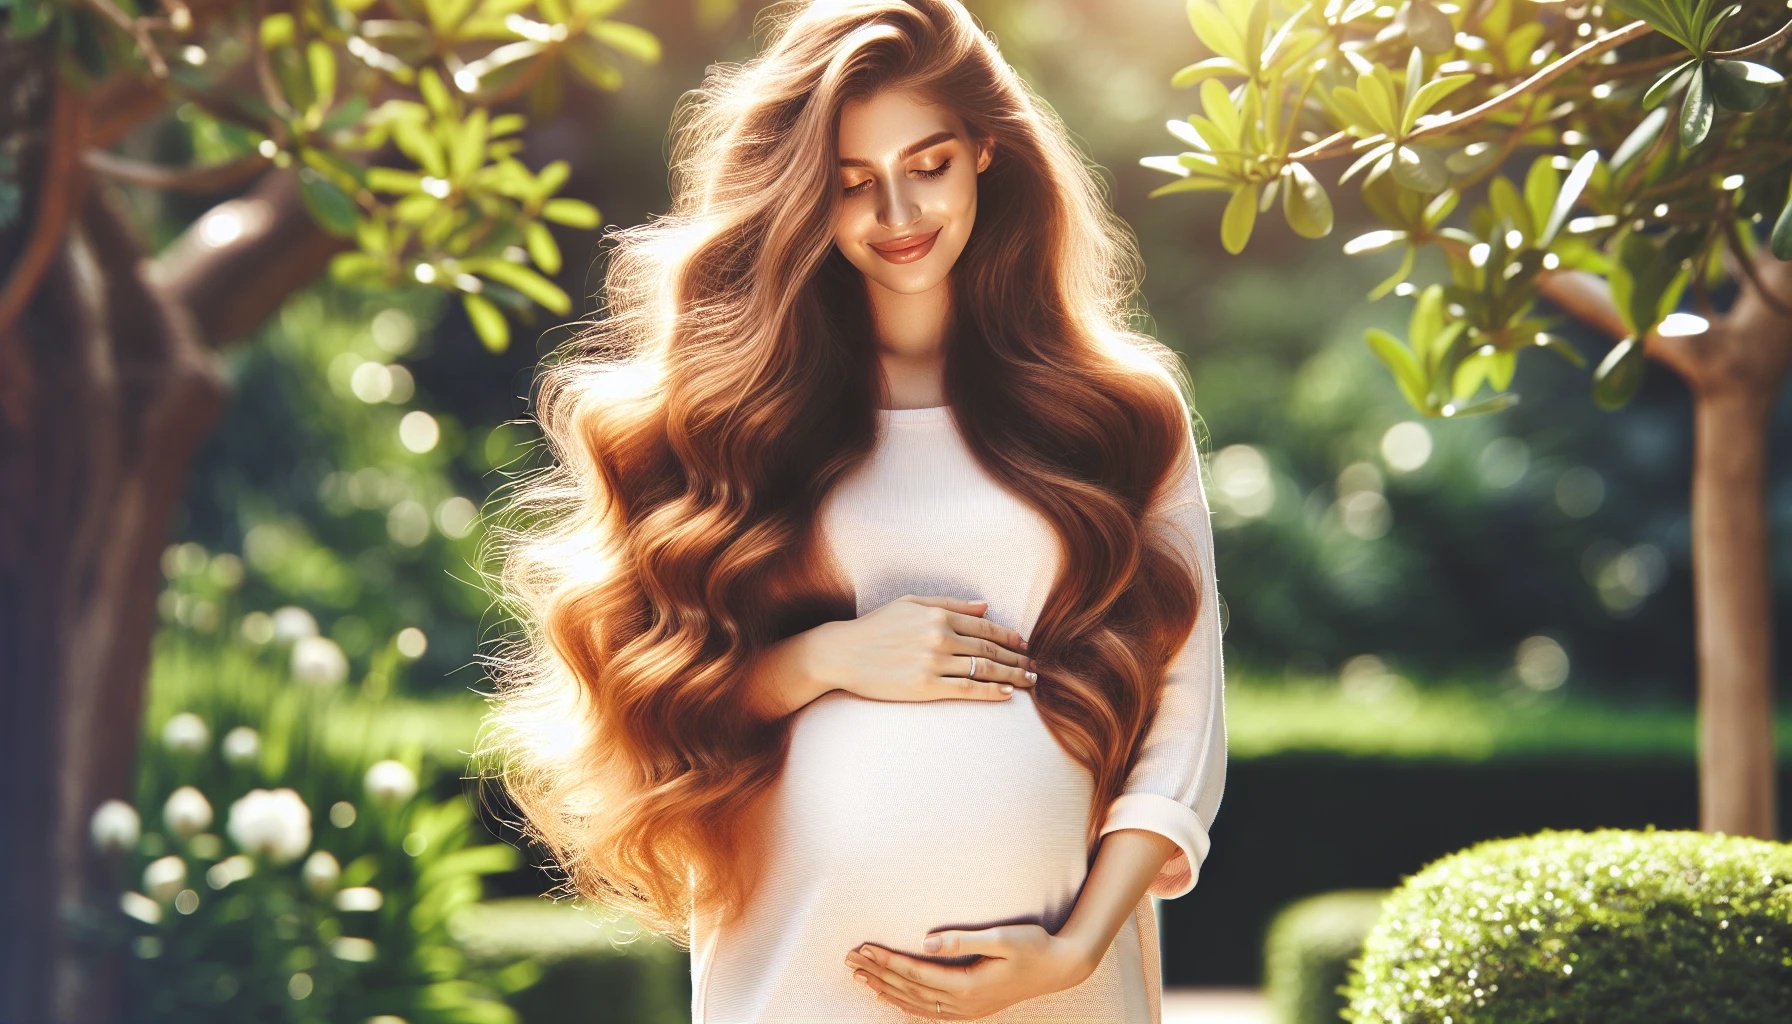 Illustration of a pregnant woman with healthy, shiny hair